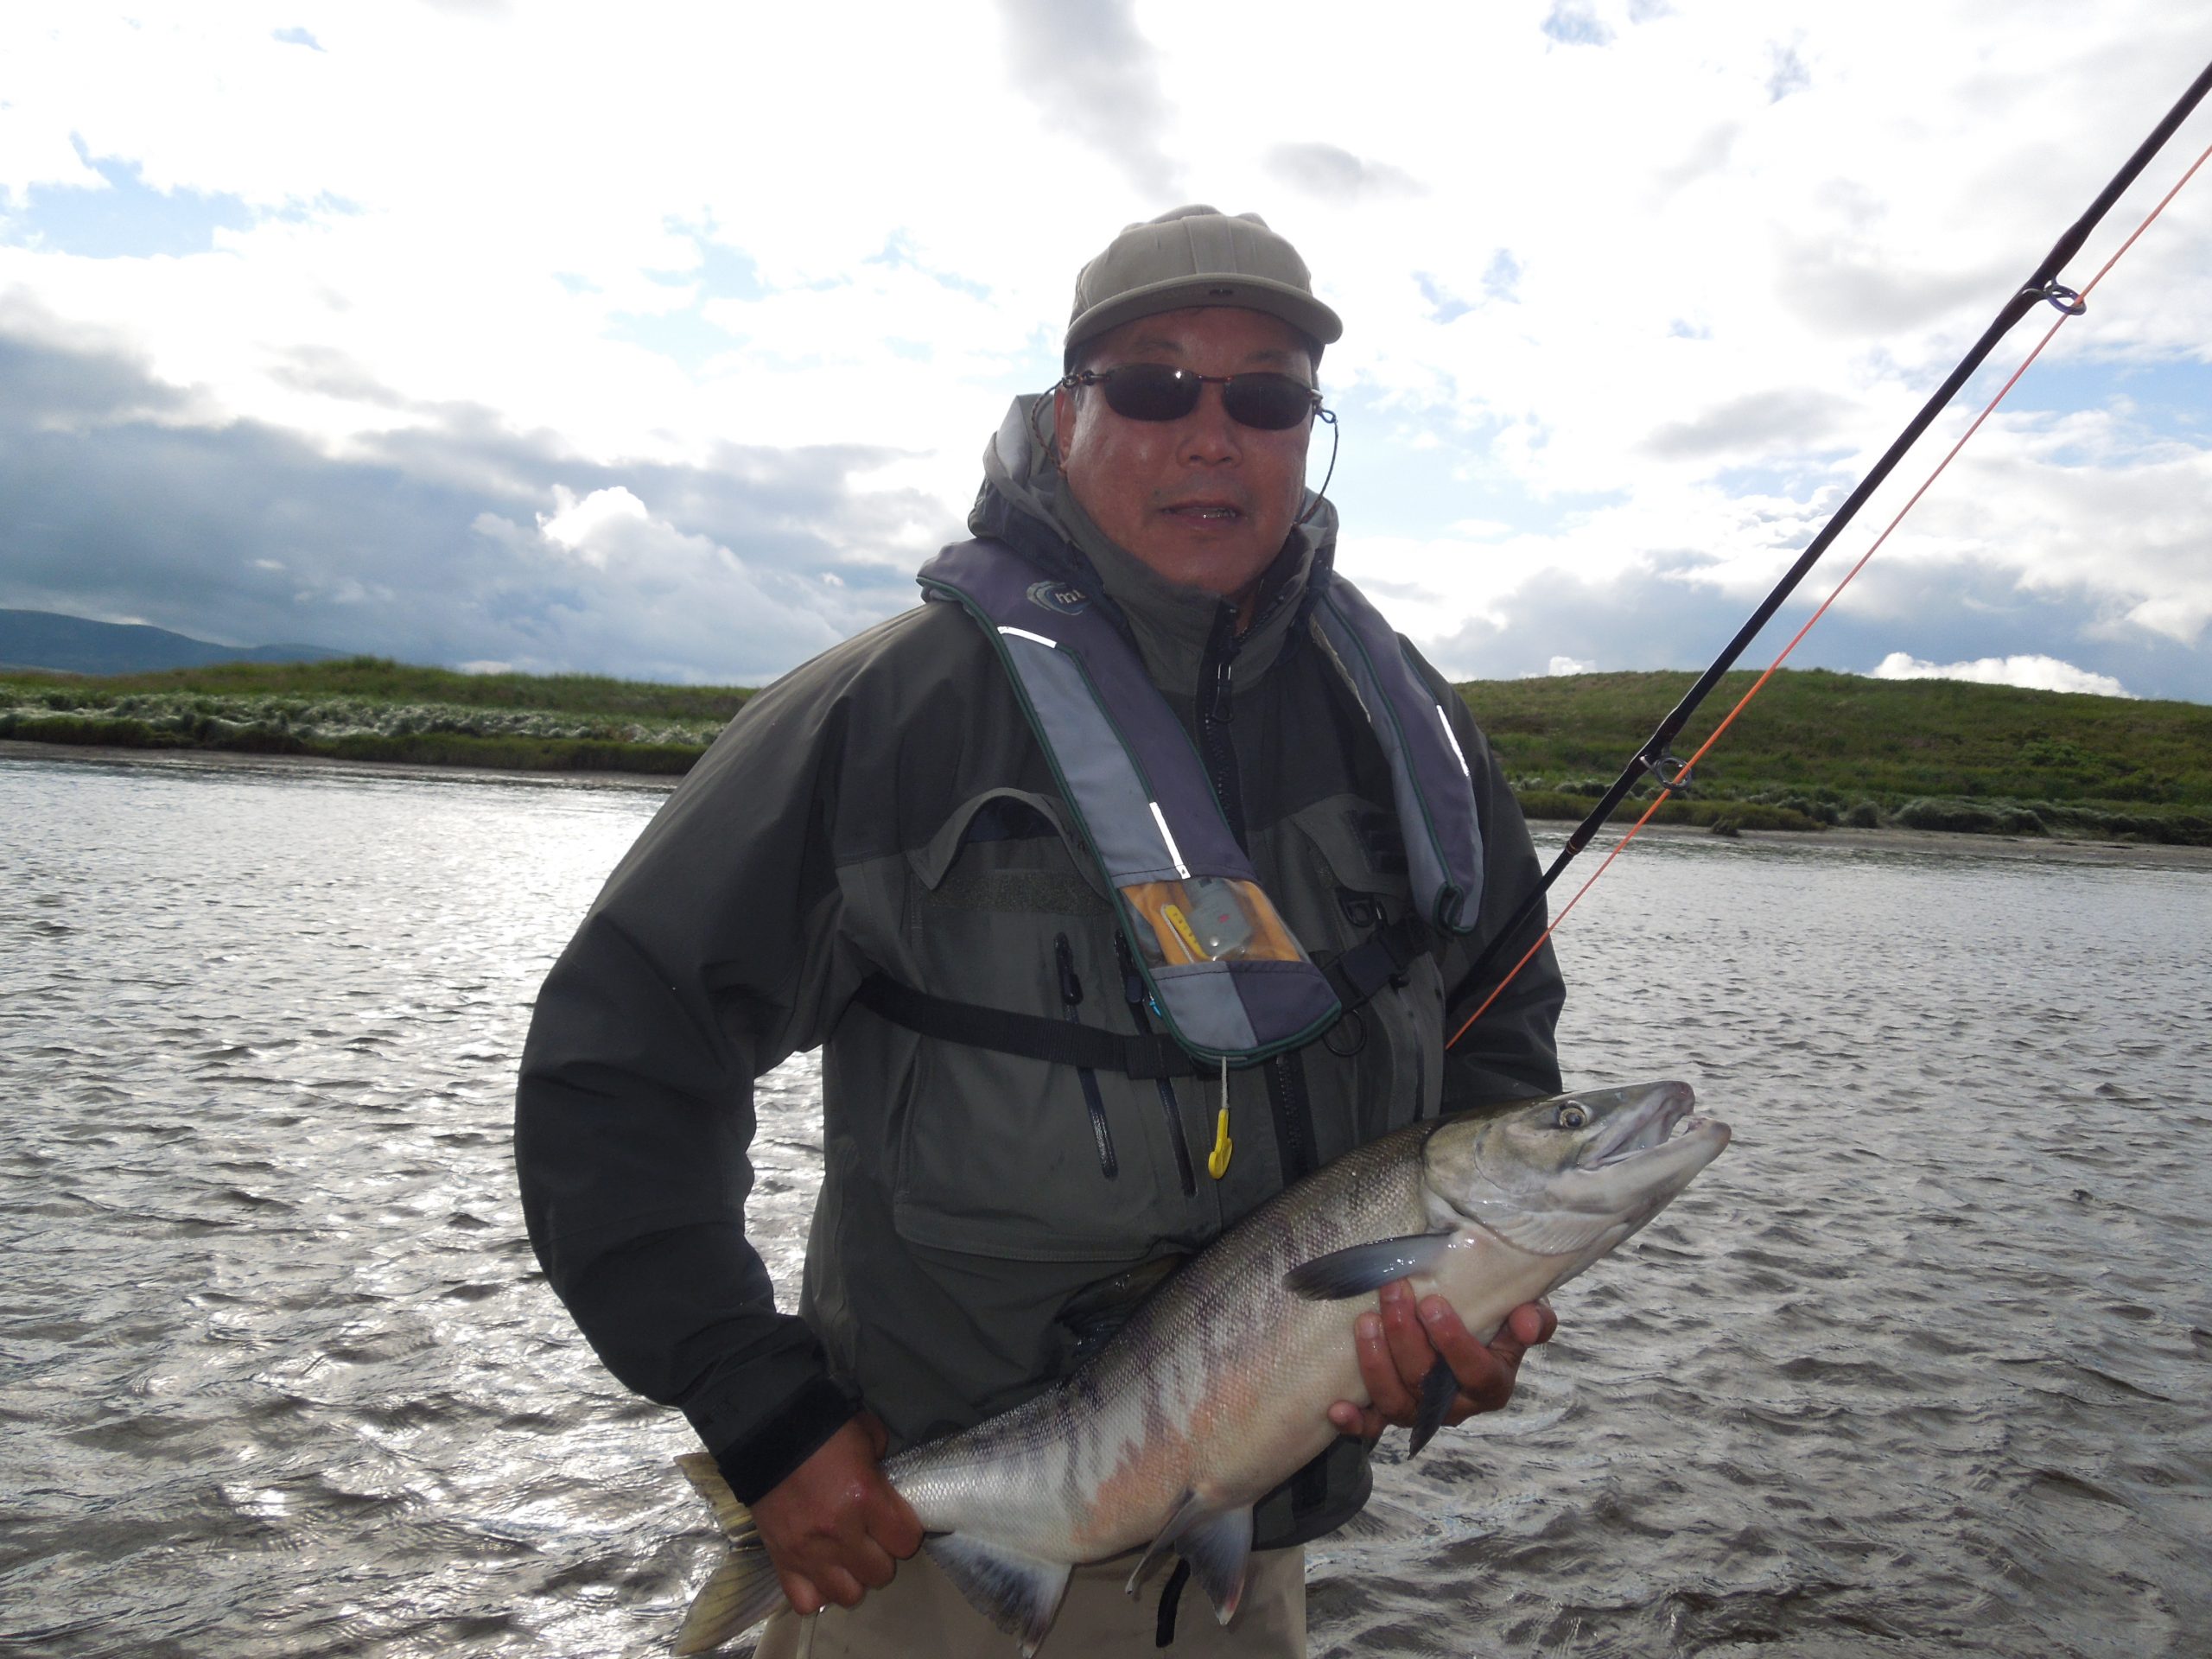 Race young with a Chum Salmon bristol bay lodge report